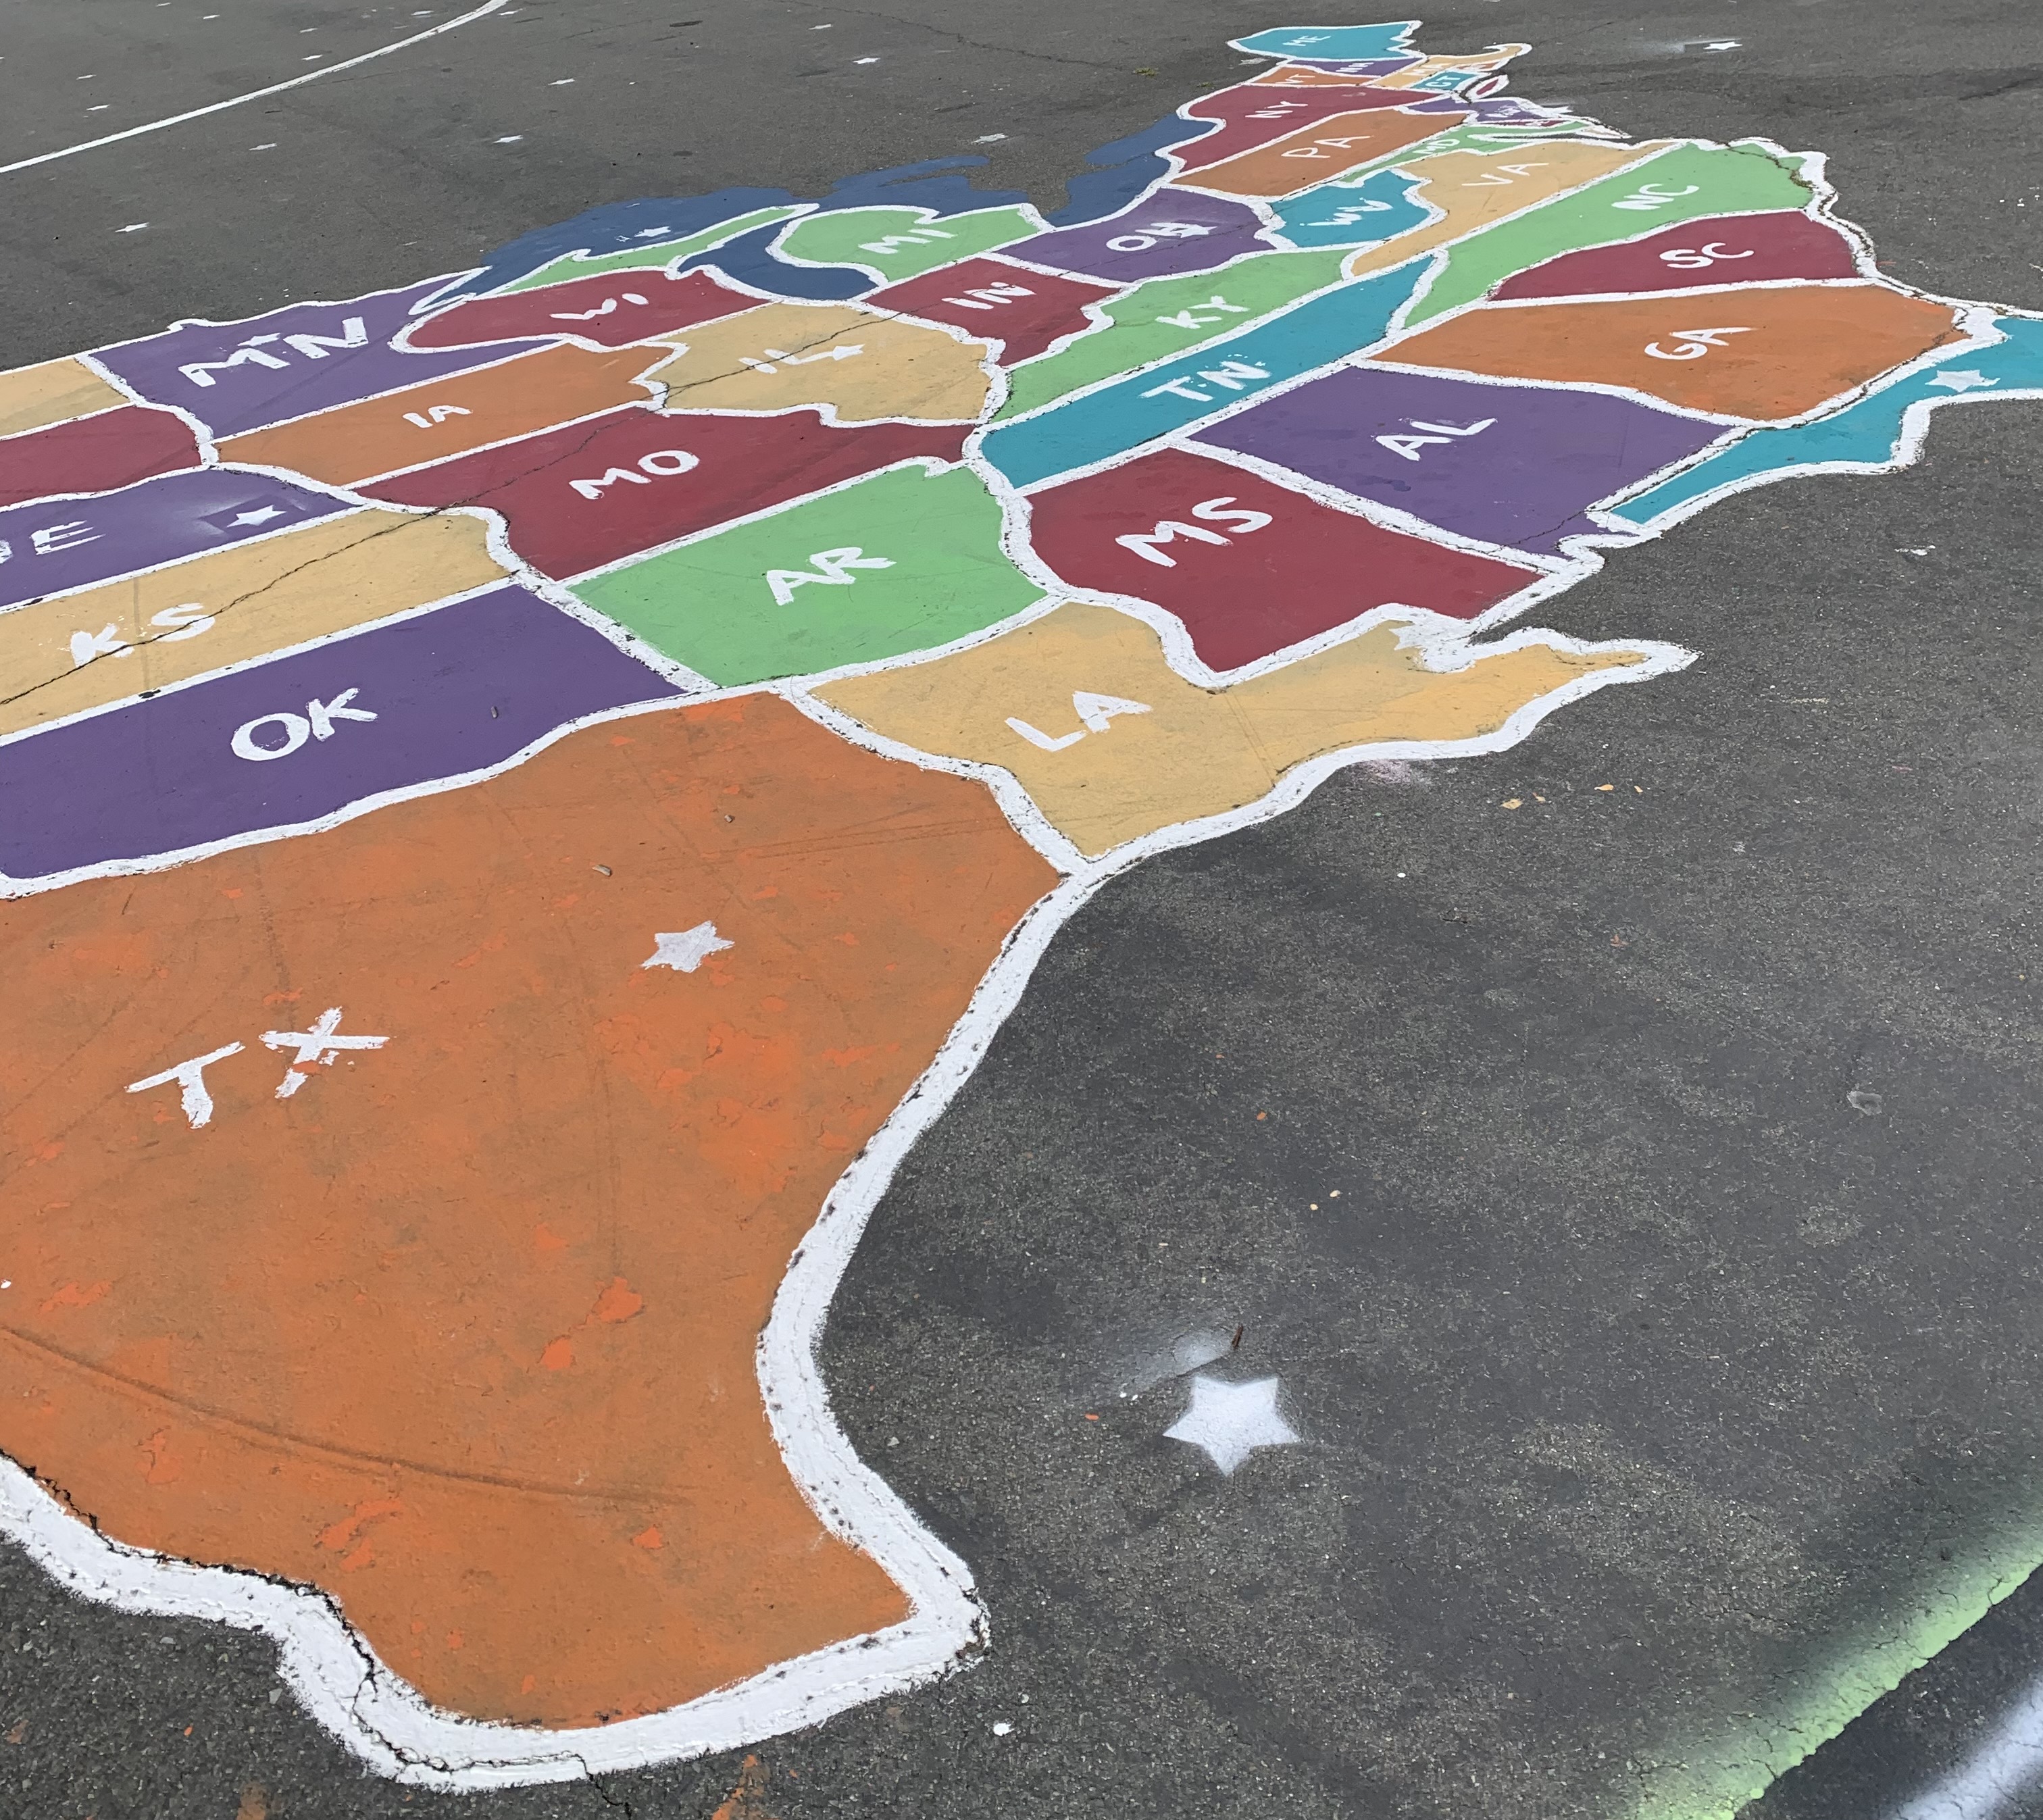 Photo of a painting on a playground of the United States with each state painted a different color.